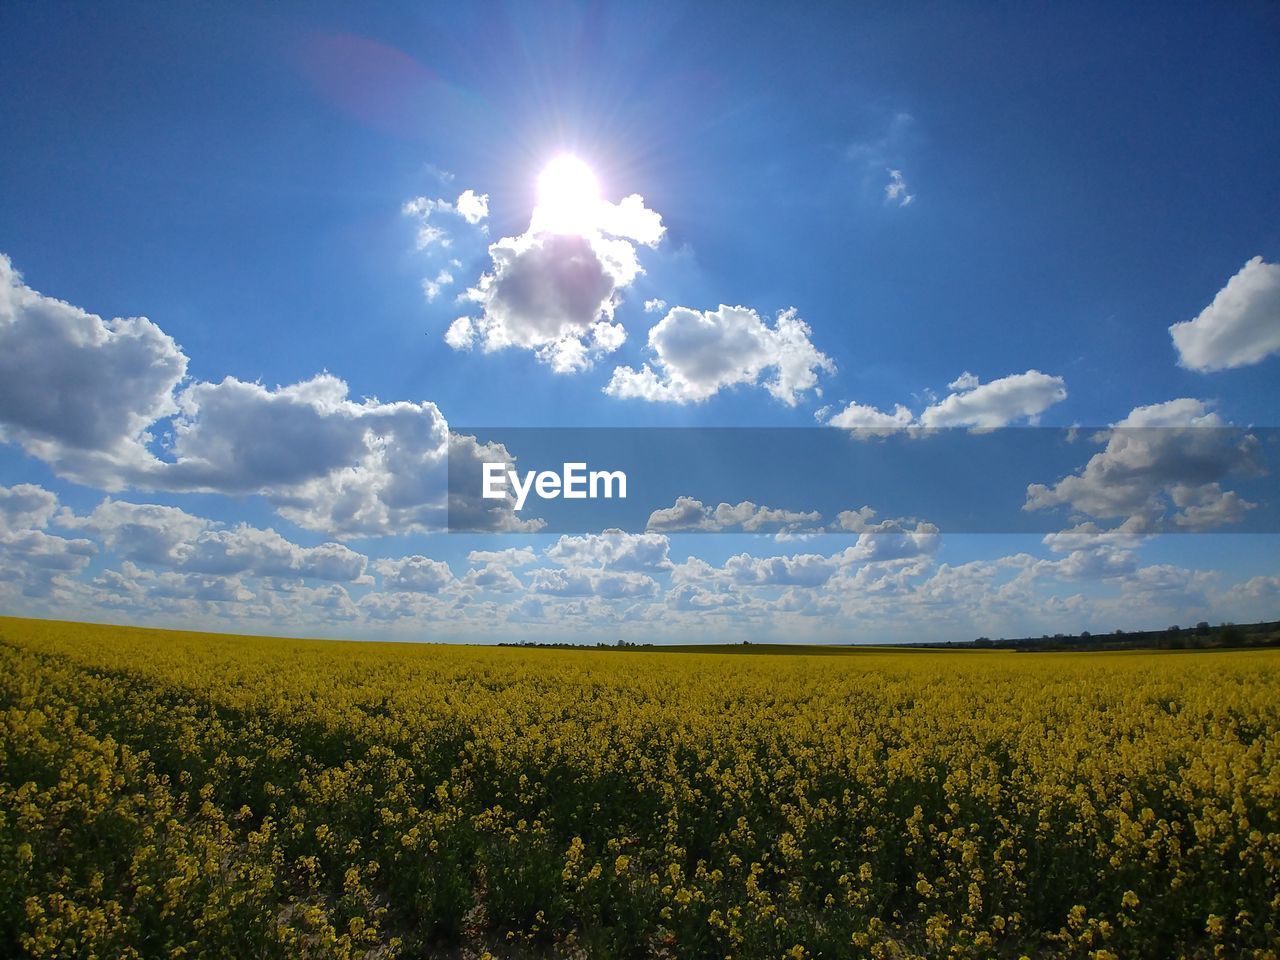 SCENIC VIEW OF YELLOW FIELD AGAINST SKY